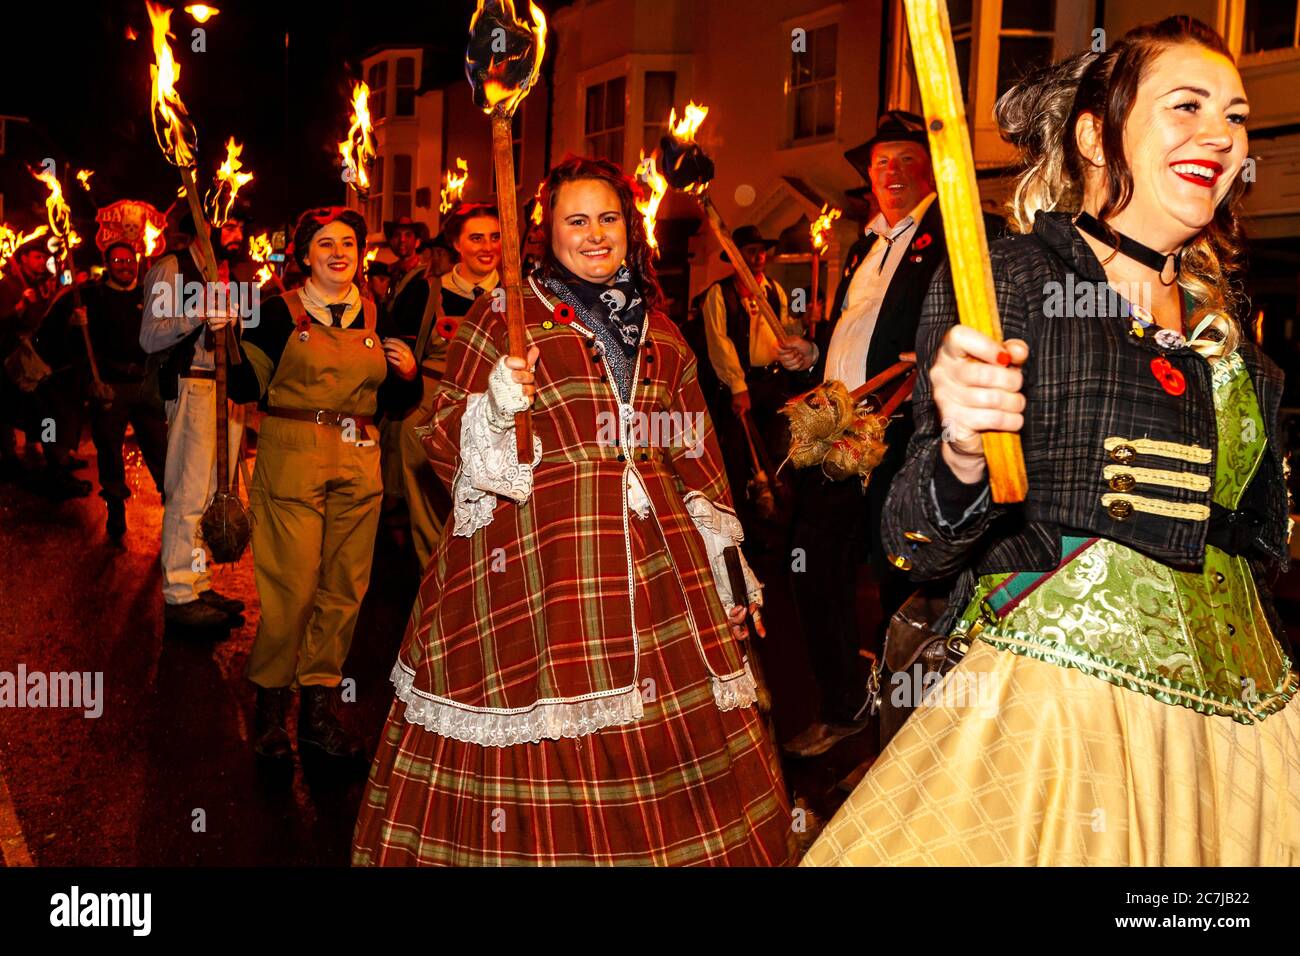 Local People In Costume Take Part In A Torchlight Street Procession During Bonfire Night (Guy Fawkes Night) Celebrations, Lewes, East Sussex, UK Stock Photo